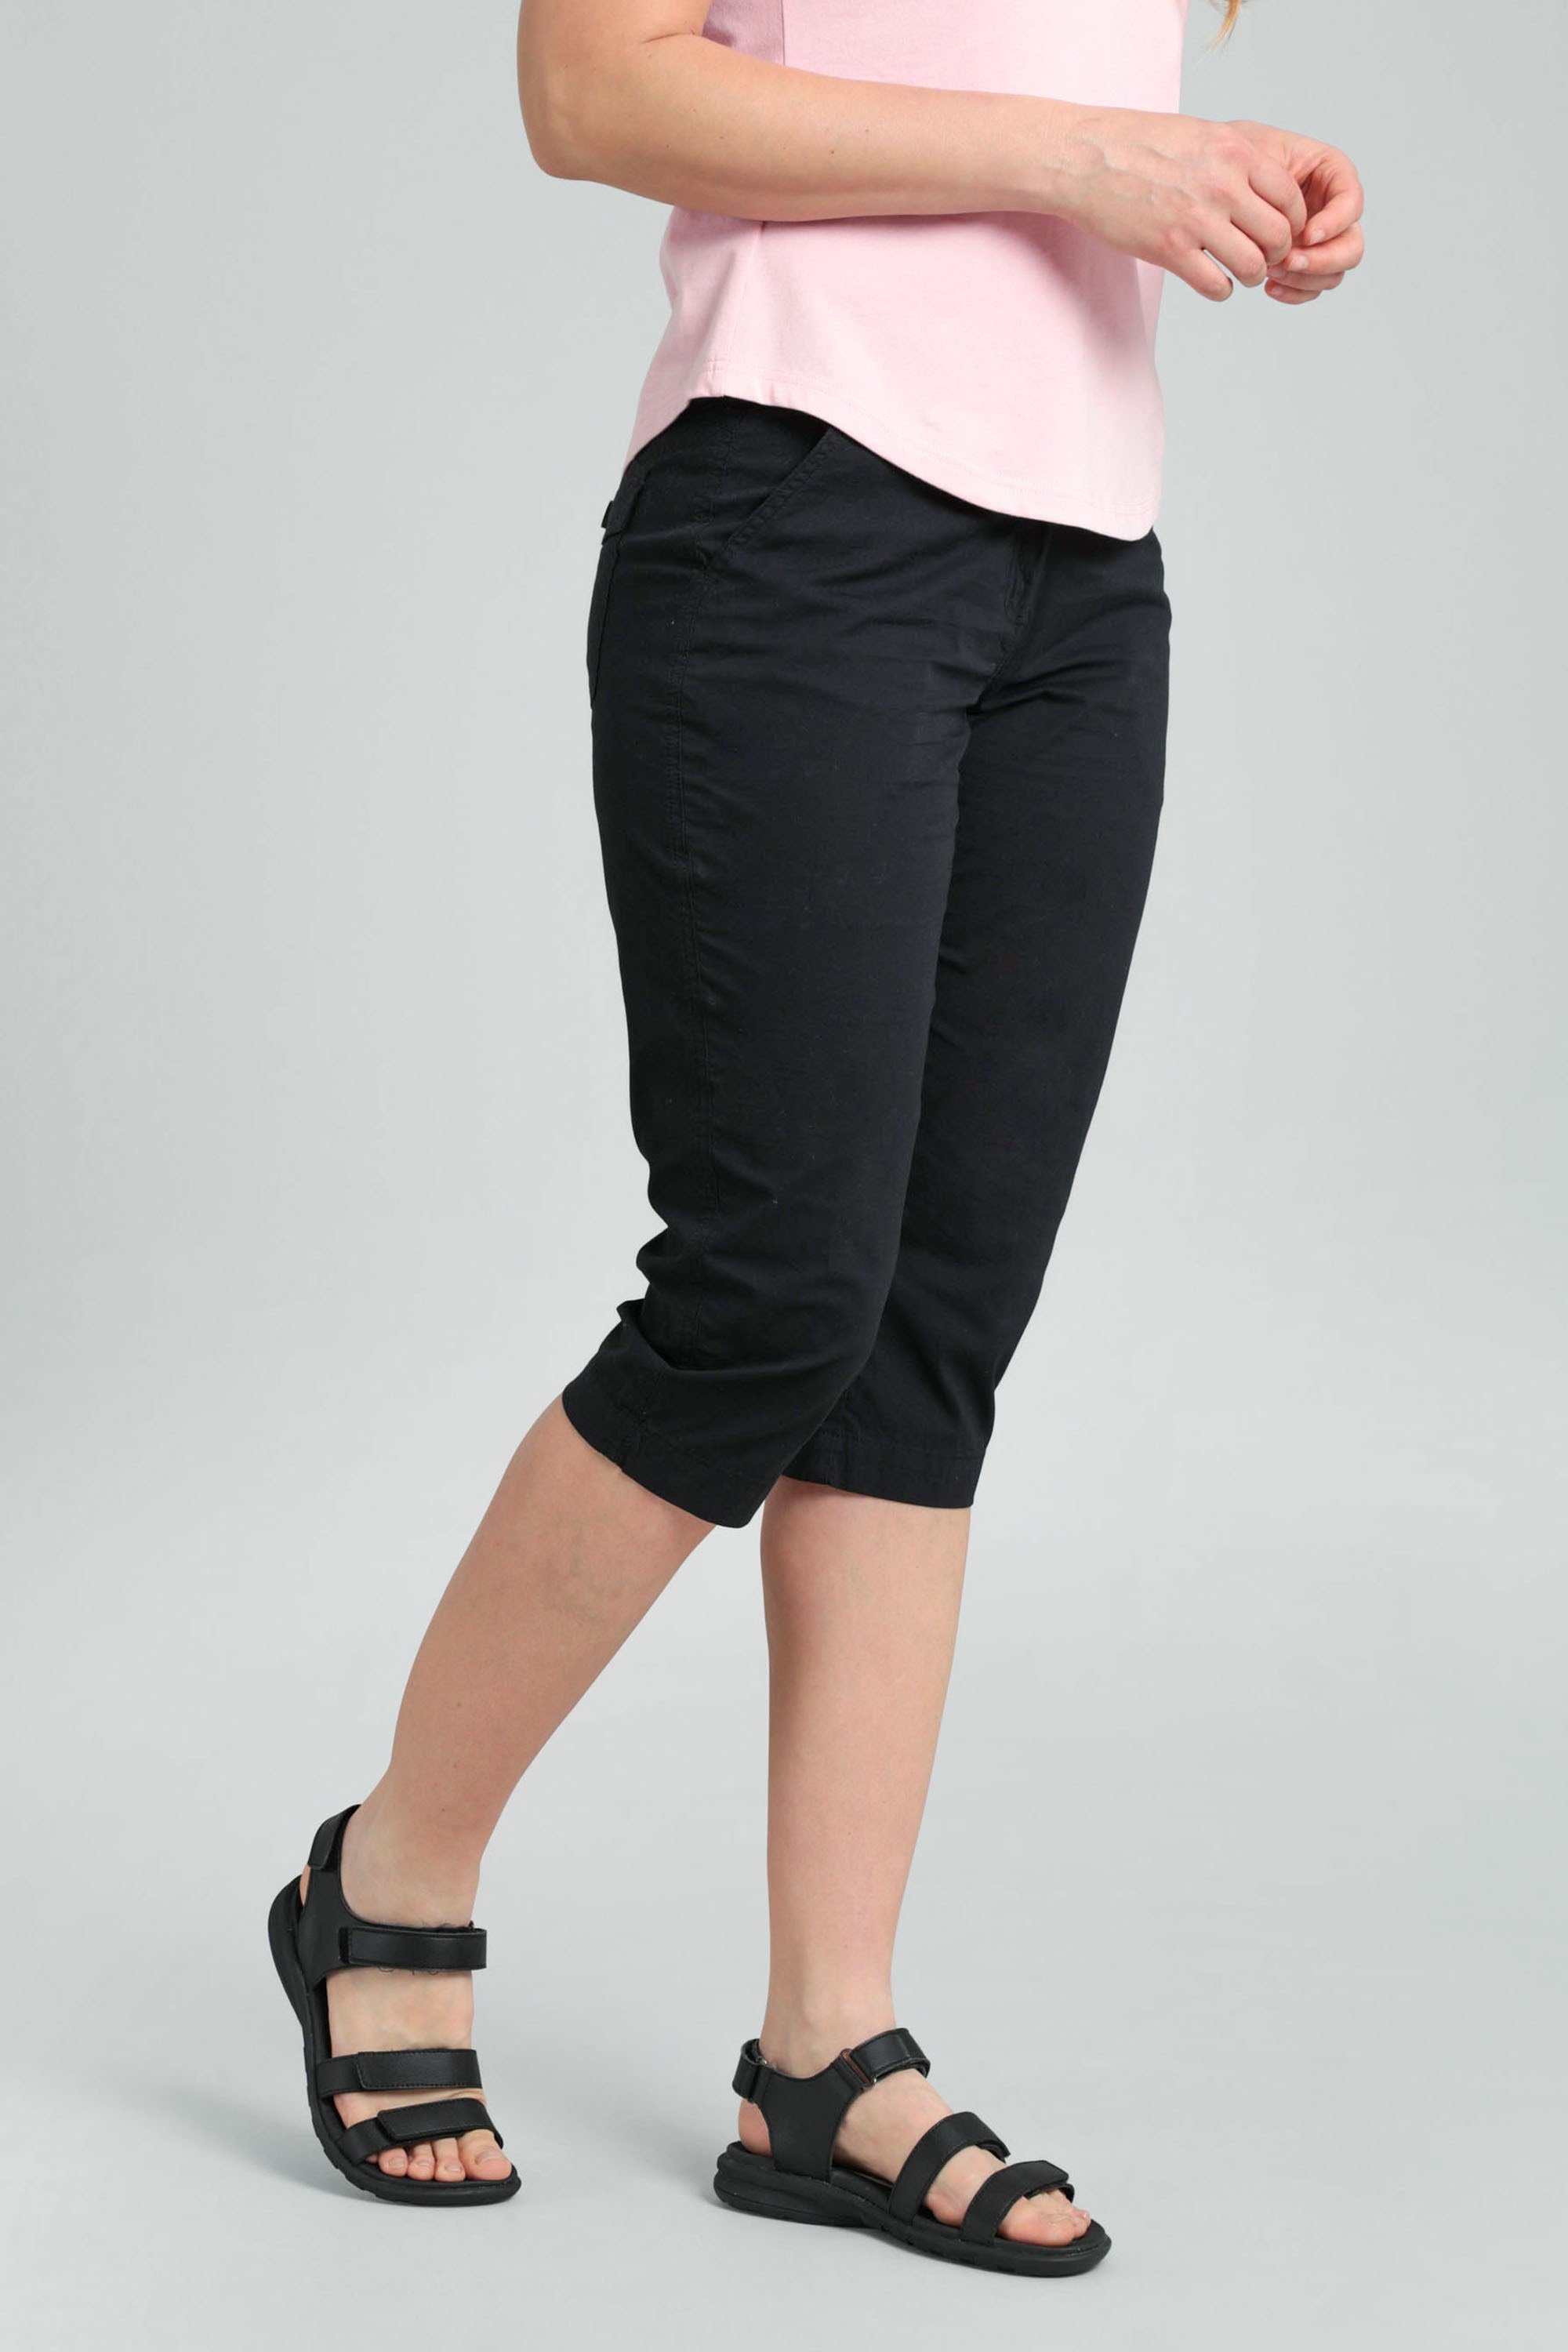 Buy Flirt Nx Womens High Rise Black Capris Online at Low Prices in India   Paytmmallcom